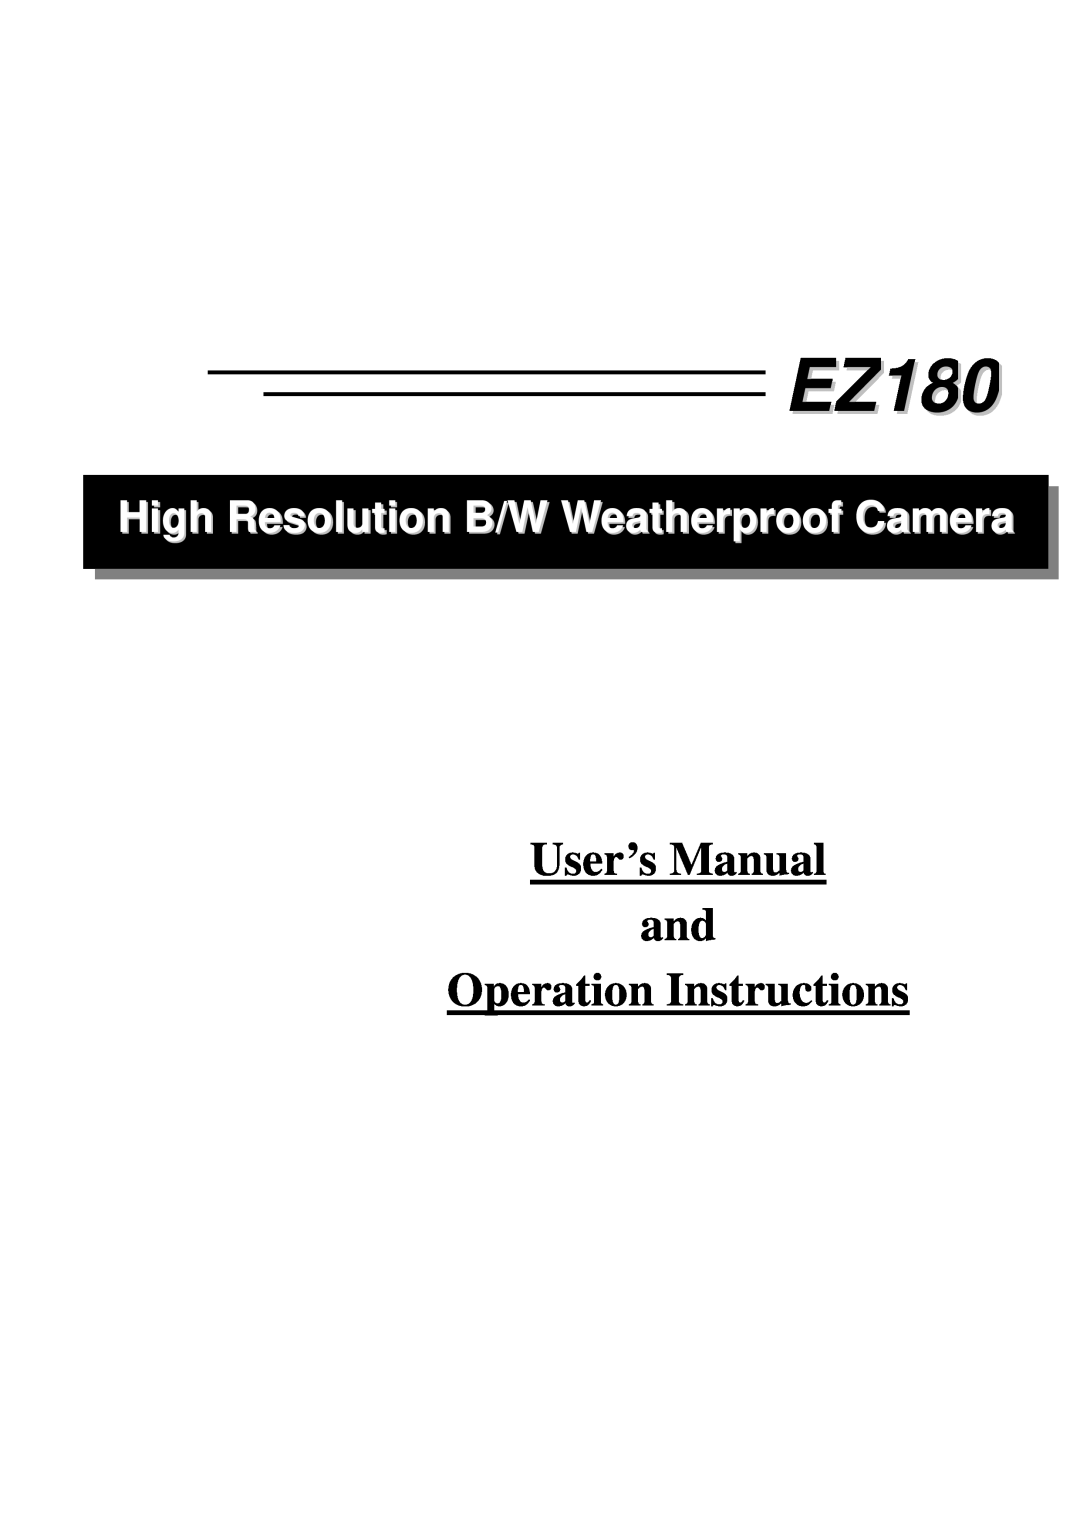 EverFocus EZ180 user manual User’s Manual and Operation Instructions, High Resolution B/W Weatherproof Camera 